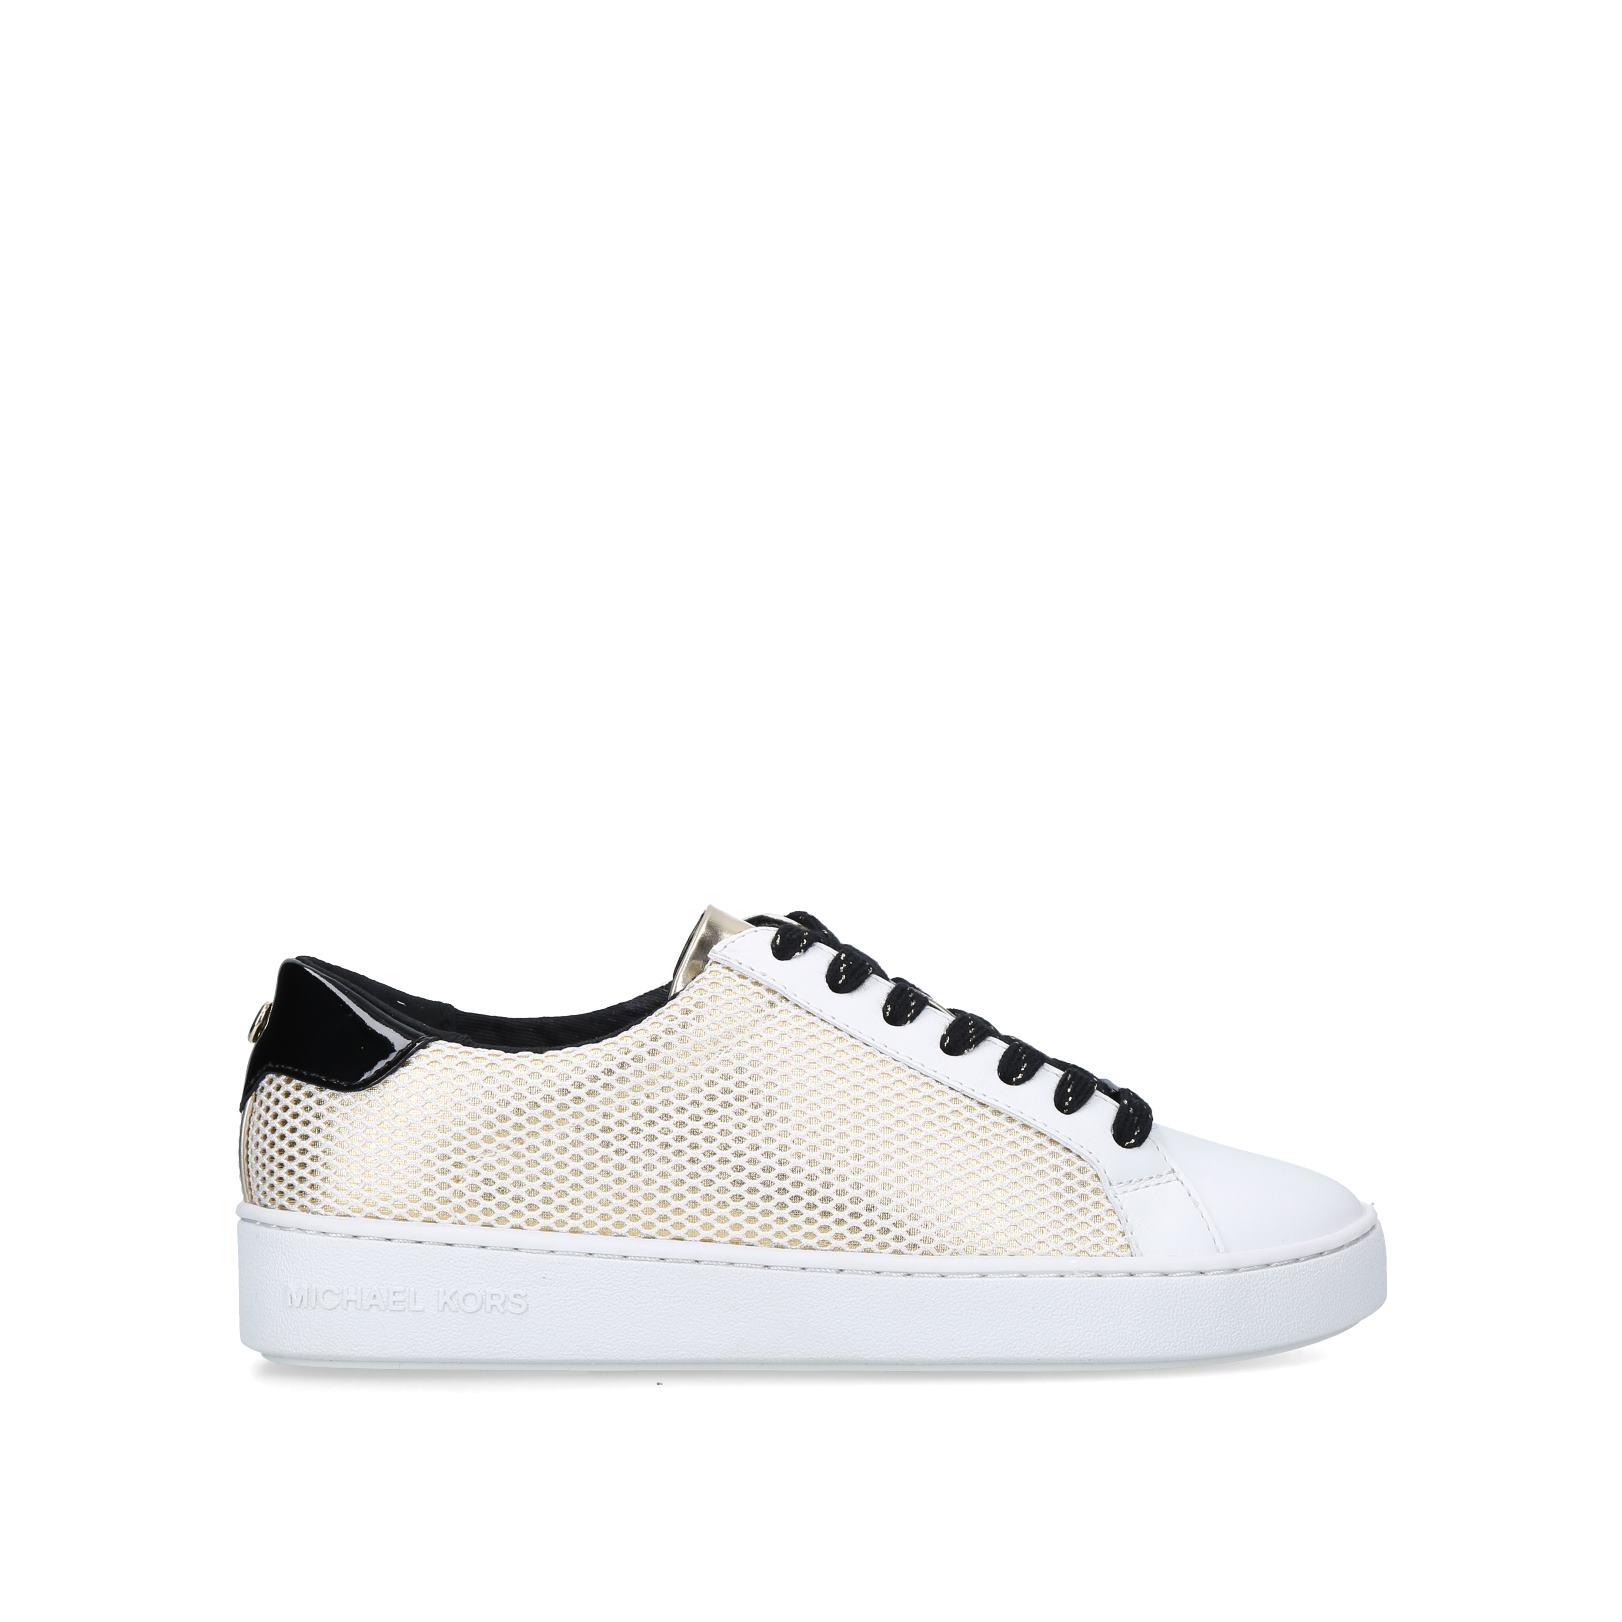 IRVING LACE UP - MICHAEL MICHAEL KORS Sneakers